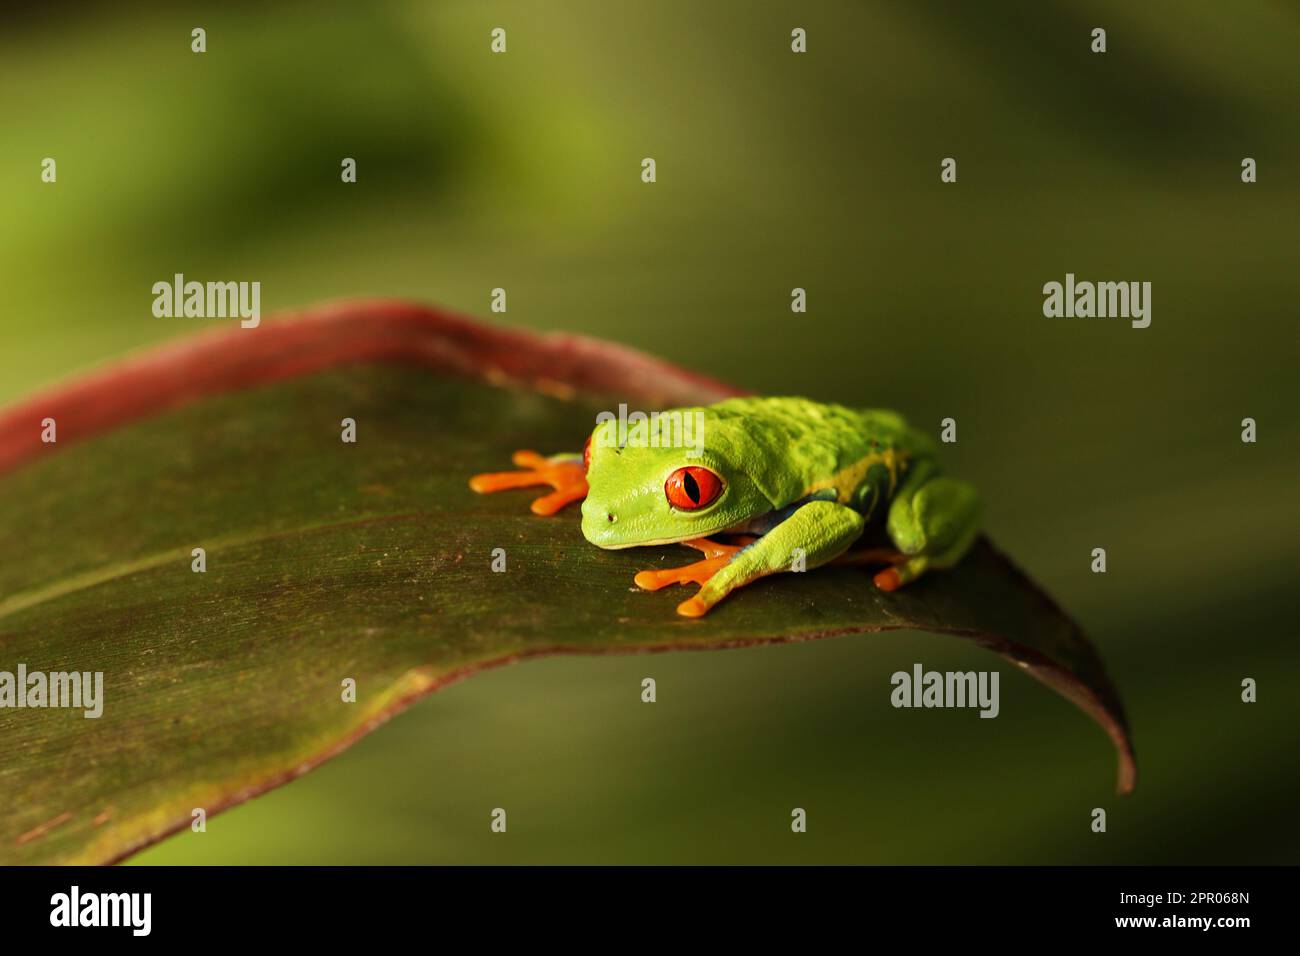 Red eyed tree frog on green leafe in Costa Rica in the tropical rainforest, cute night animal with vivid colors and big eye, agalychnis callidryas Stock Photo